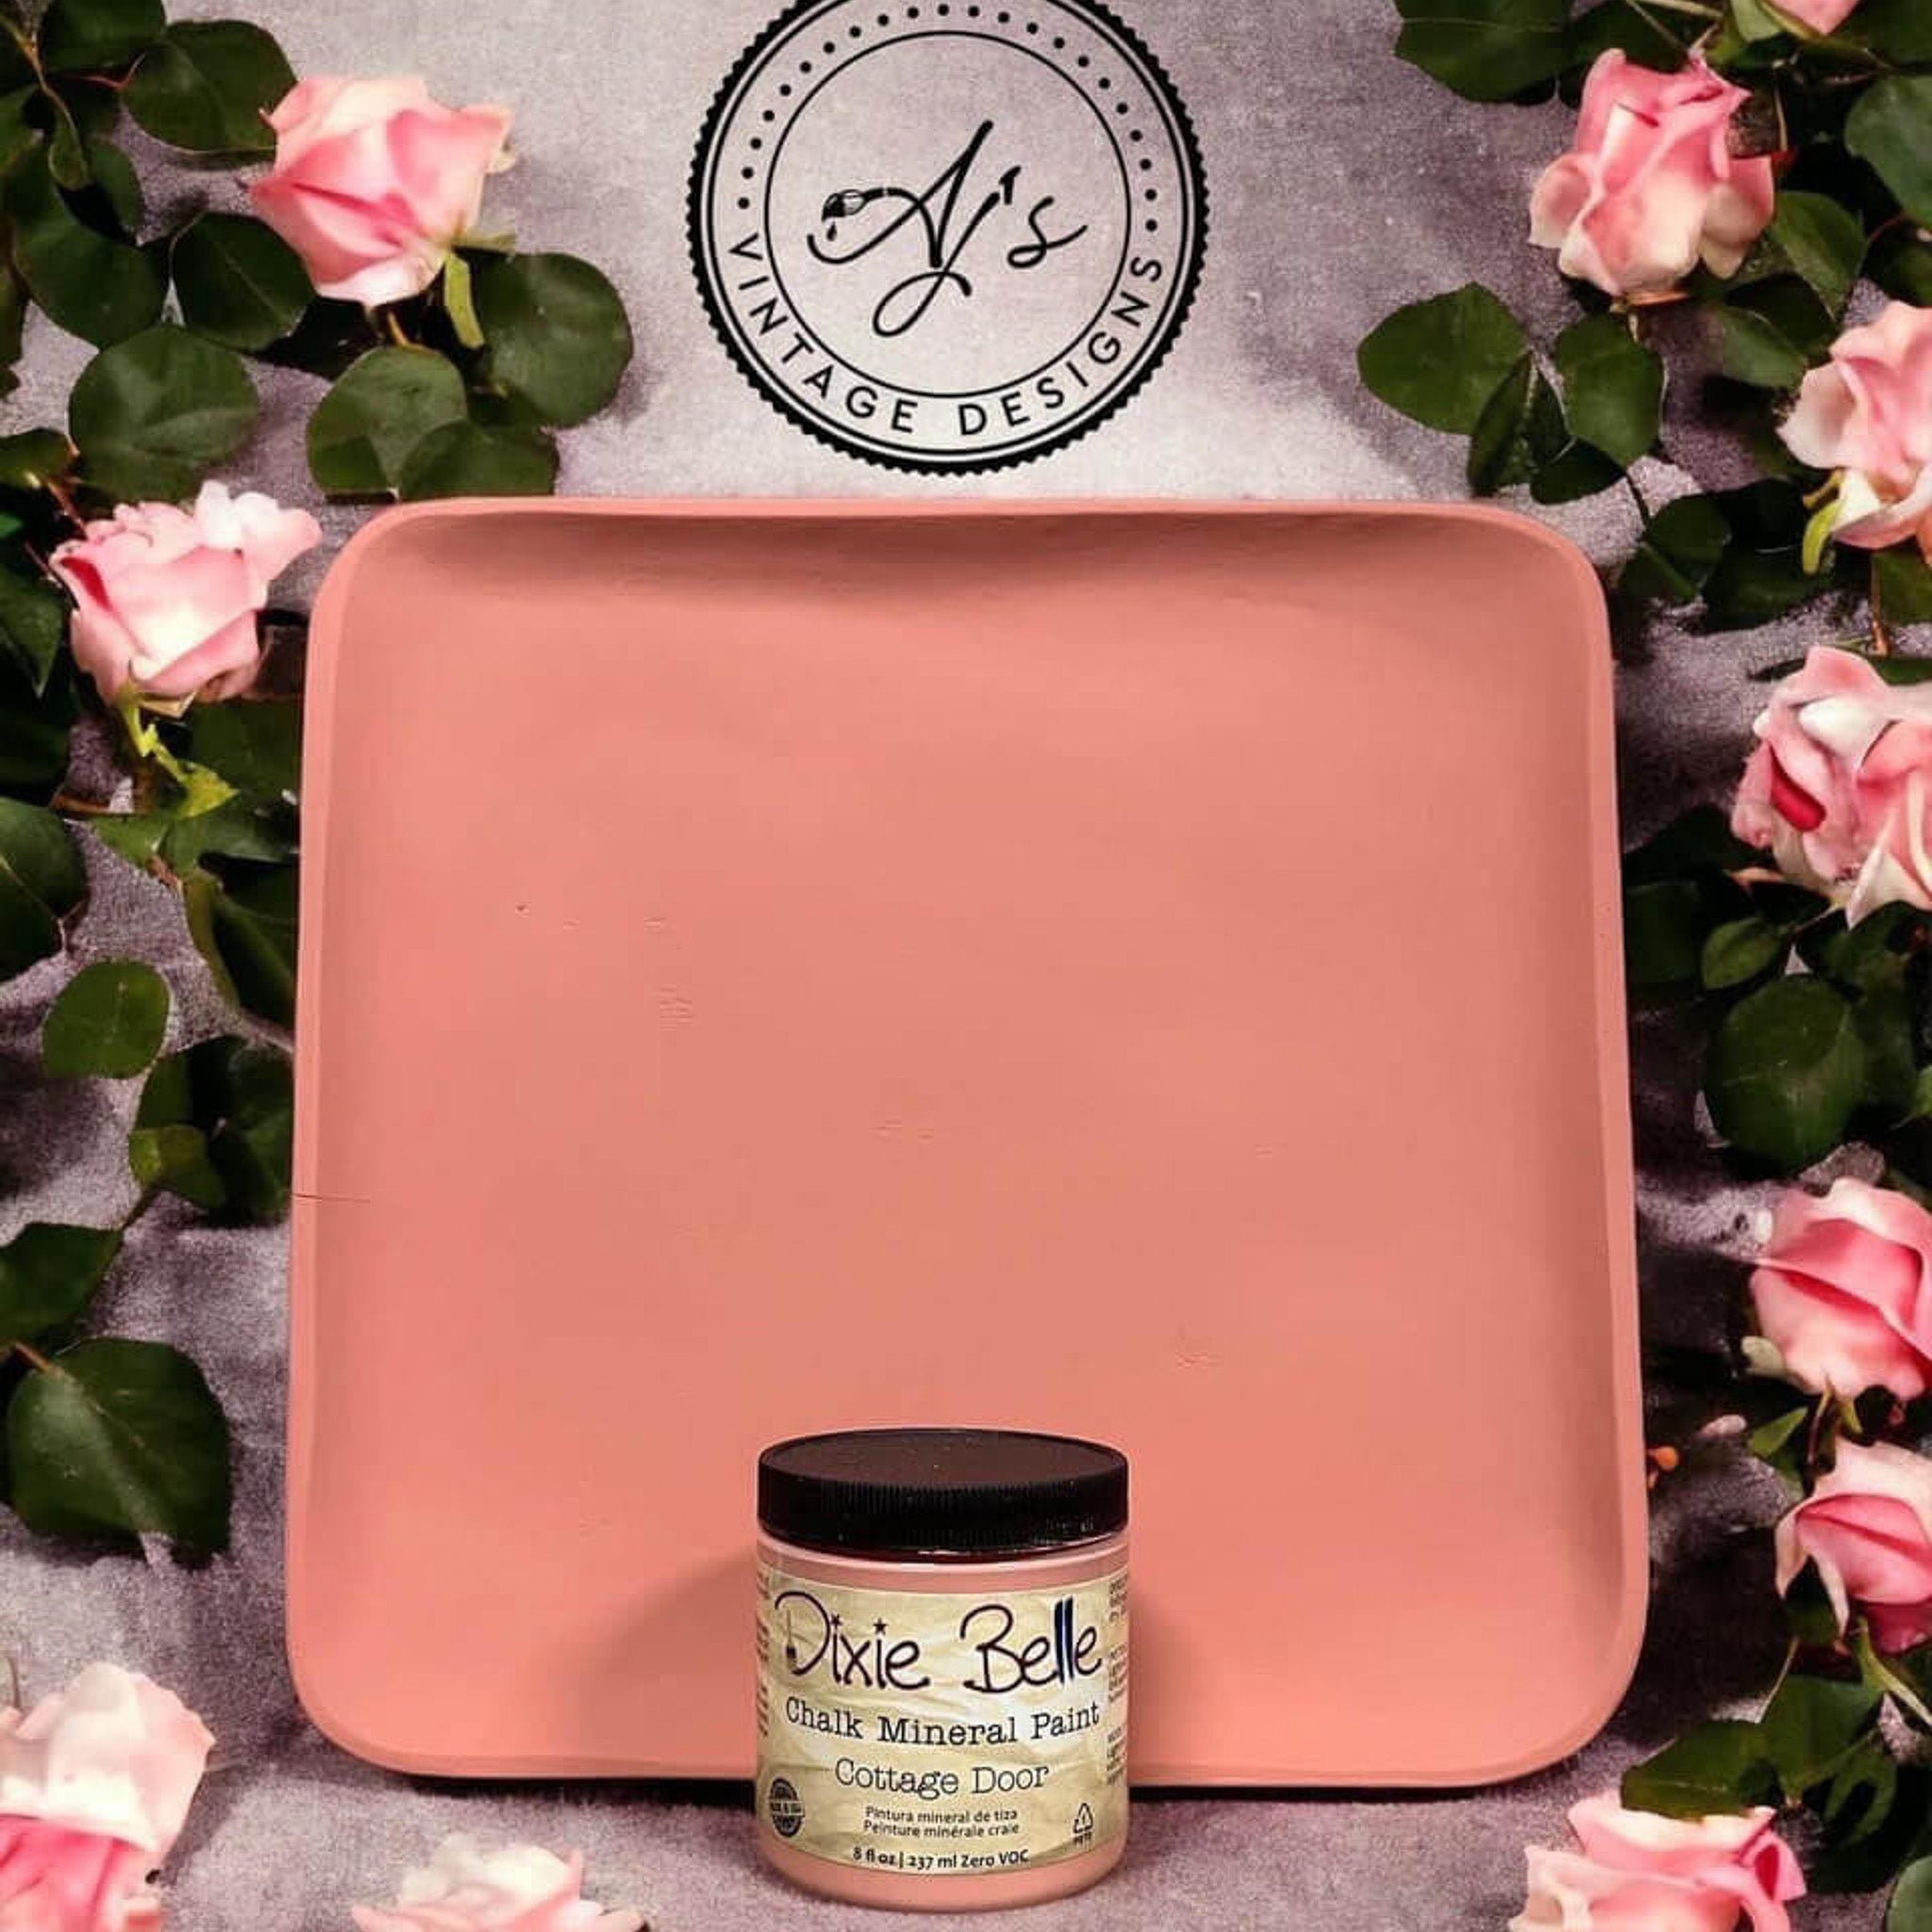 A wood tray repainted by AJ's Vintage Designs using Dixie Belle's Cottage Door chalk mineral paint is pictured with a container of the paint. Pink roses with green foliage surround the tray.